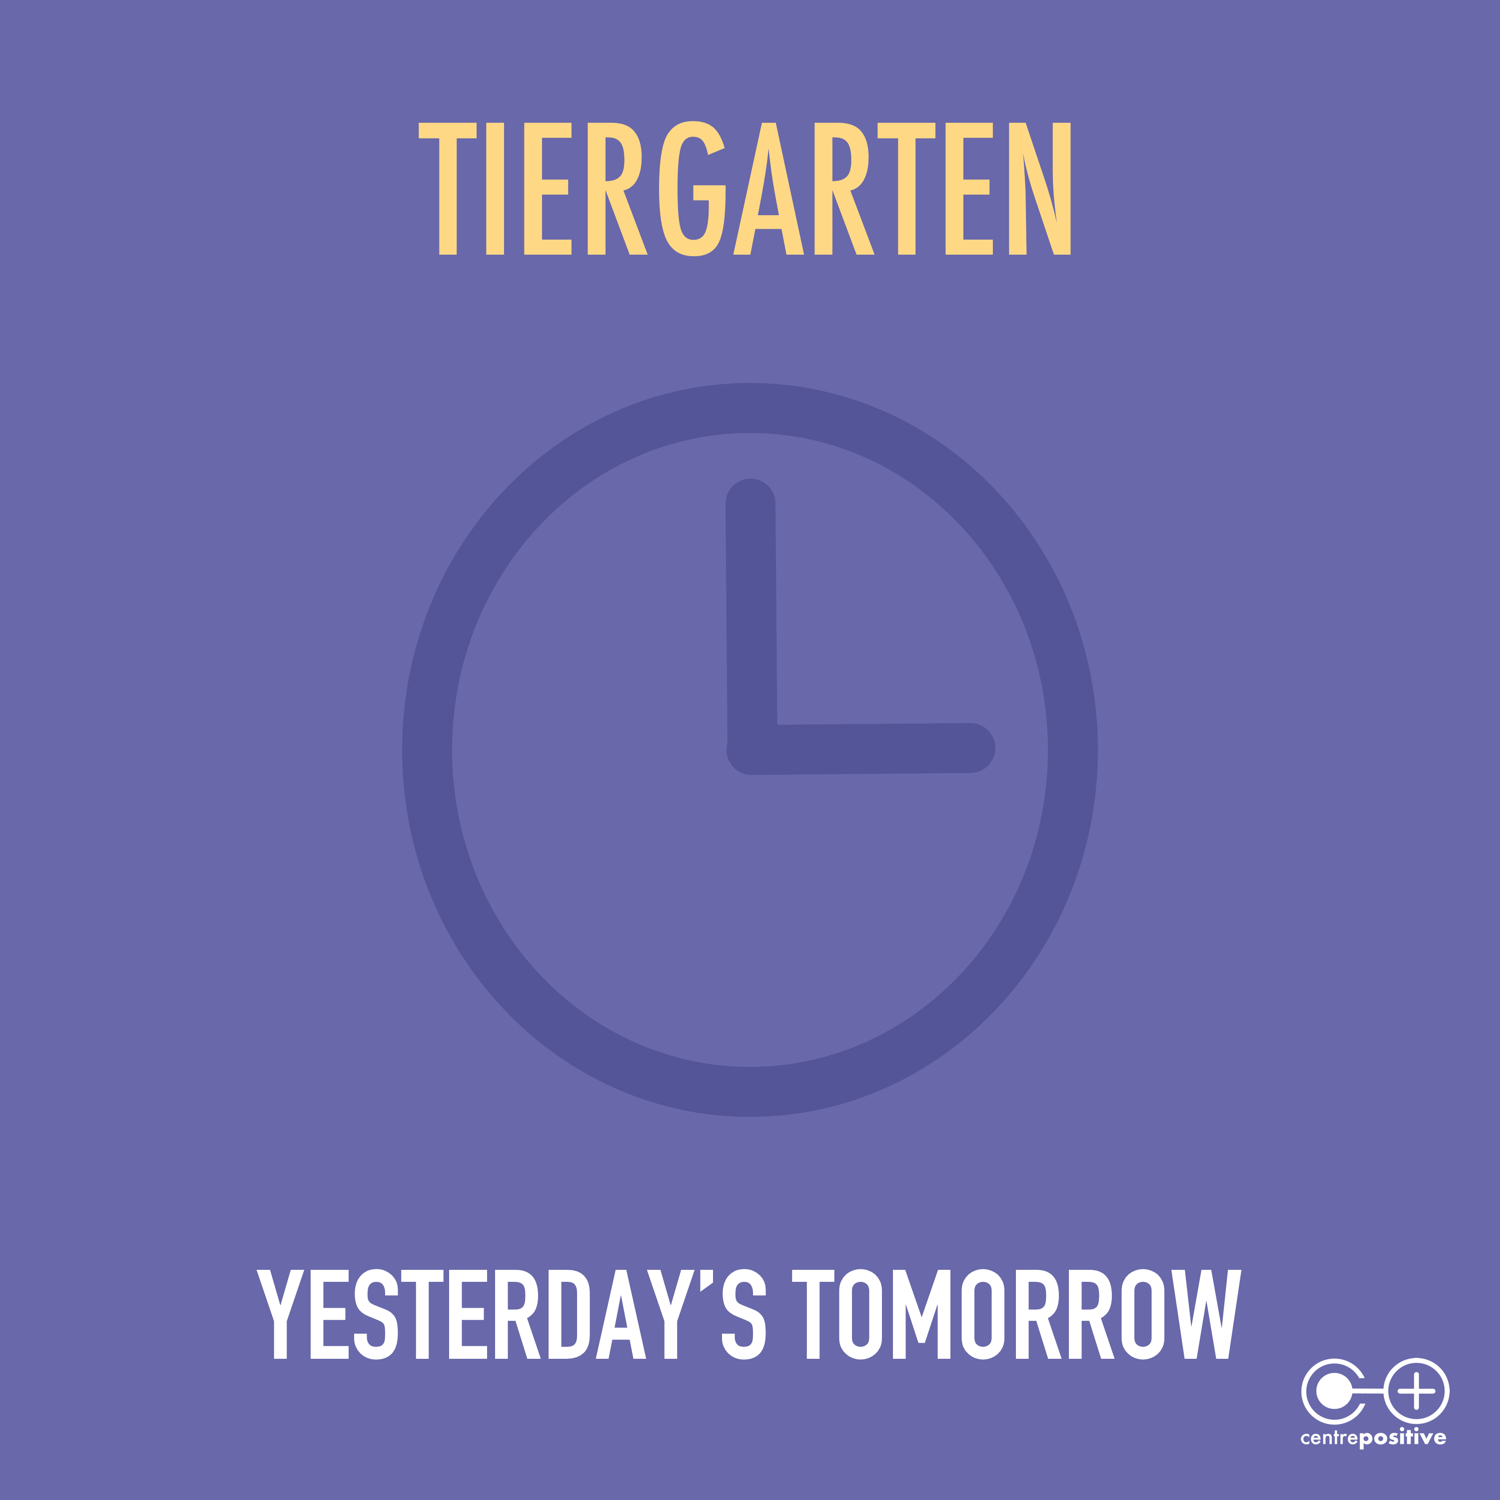 The Yesterday’s Tomorrow single cover